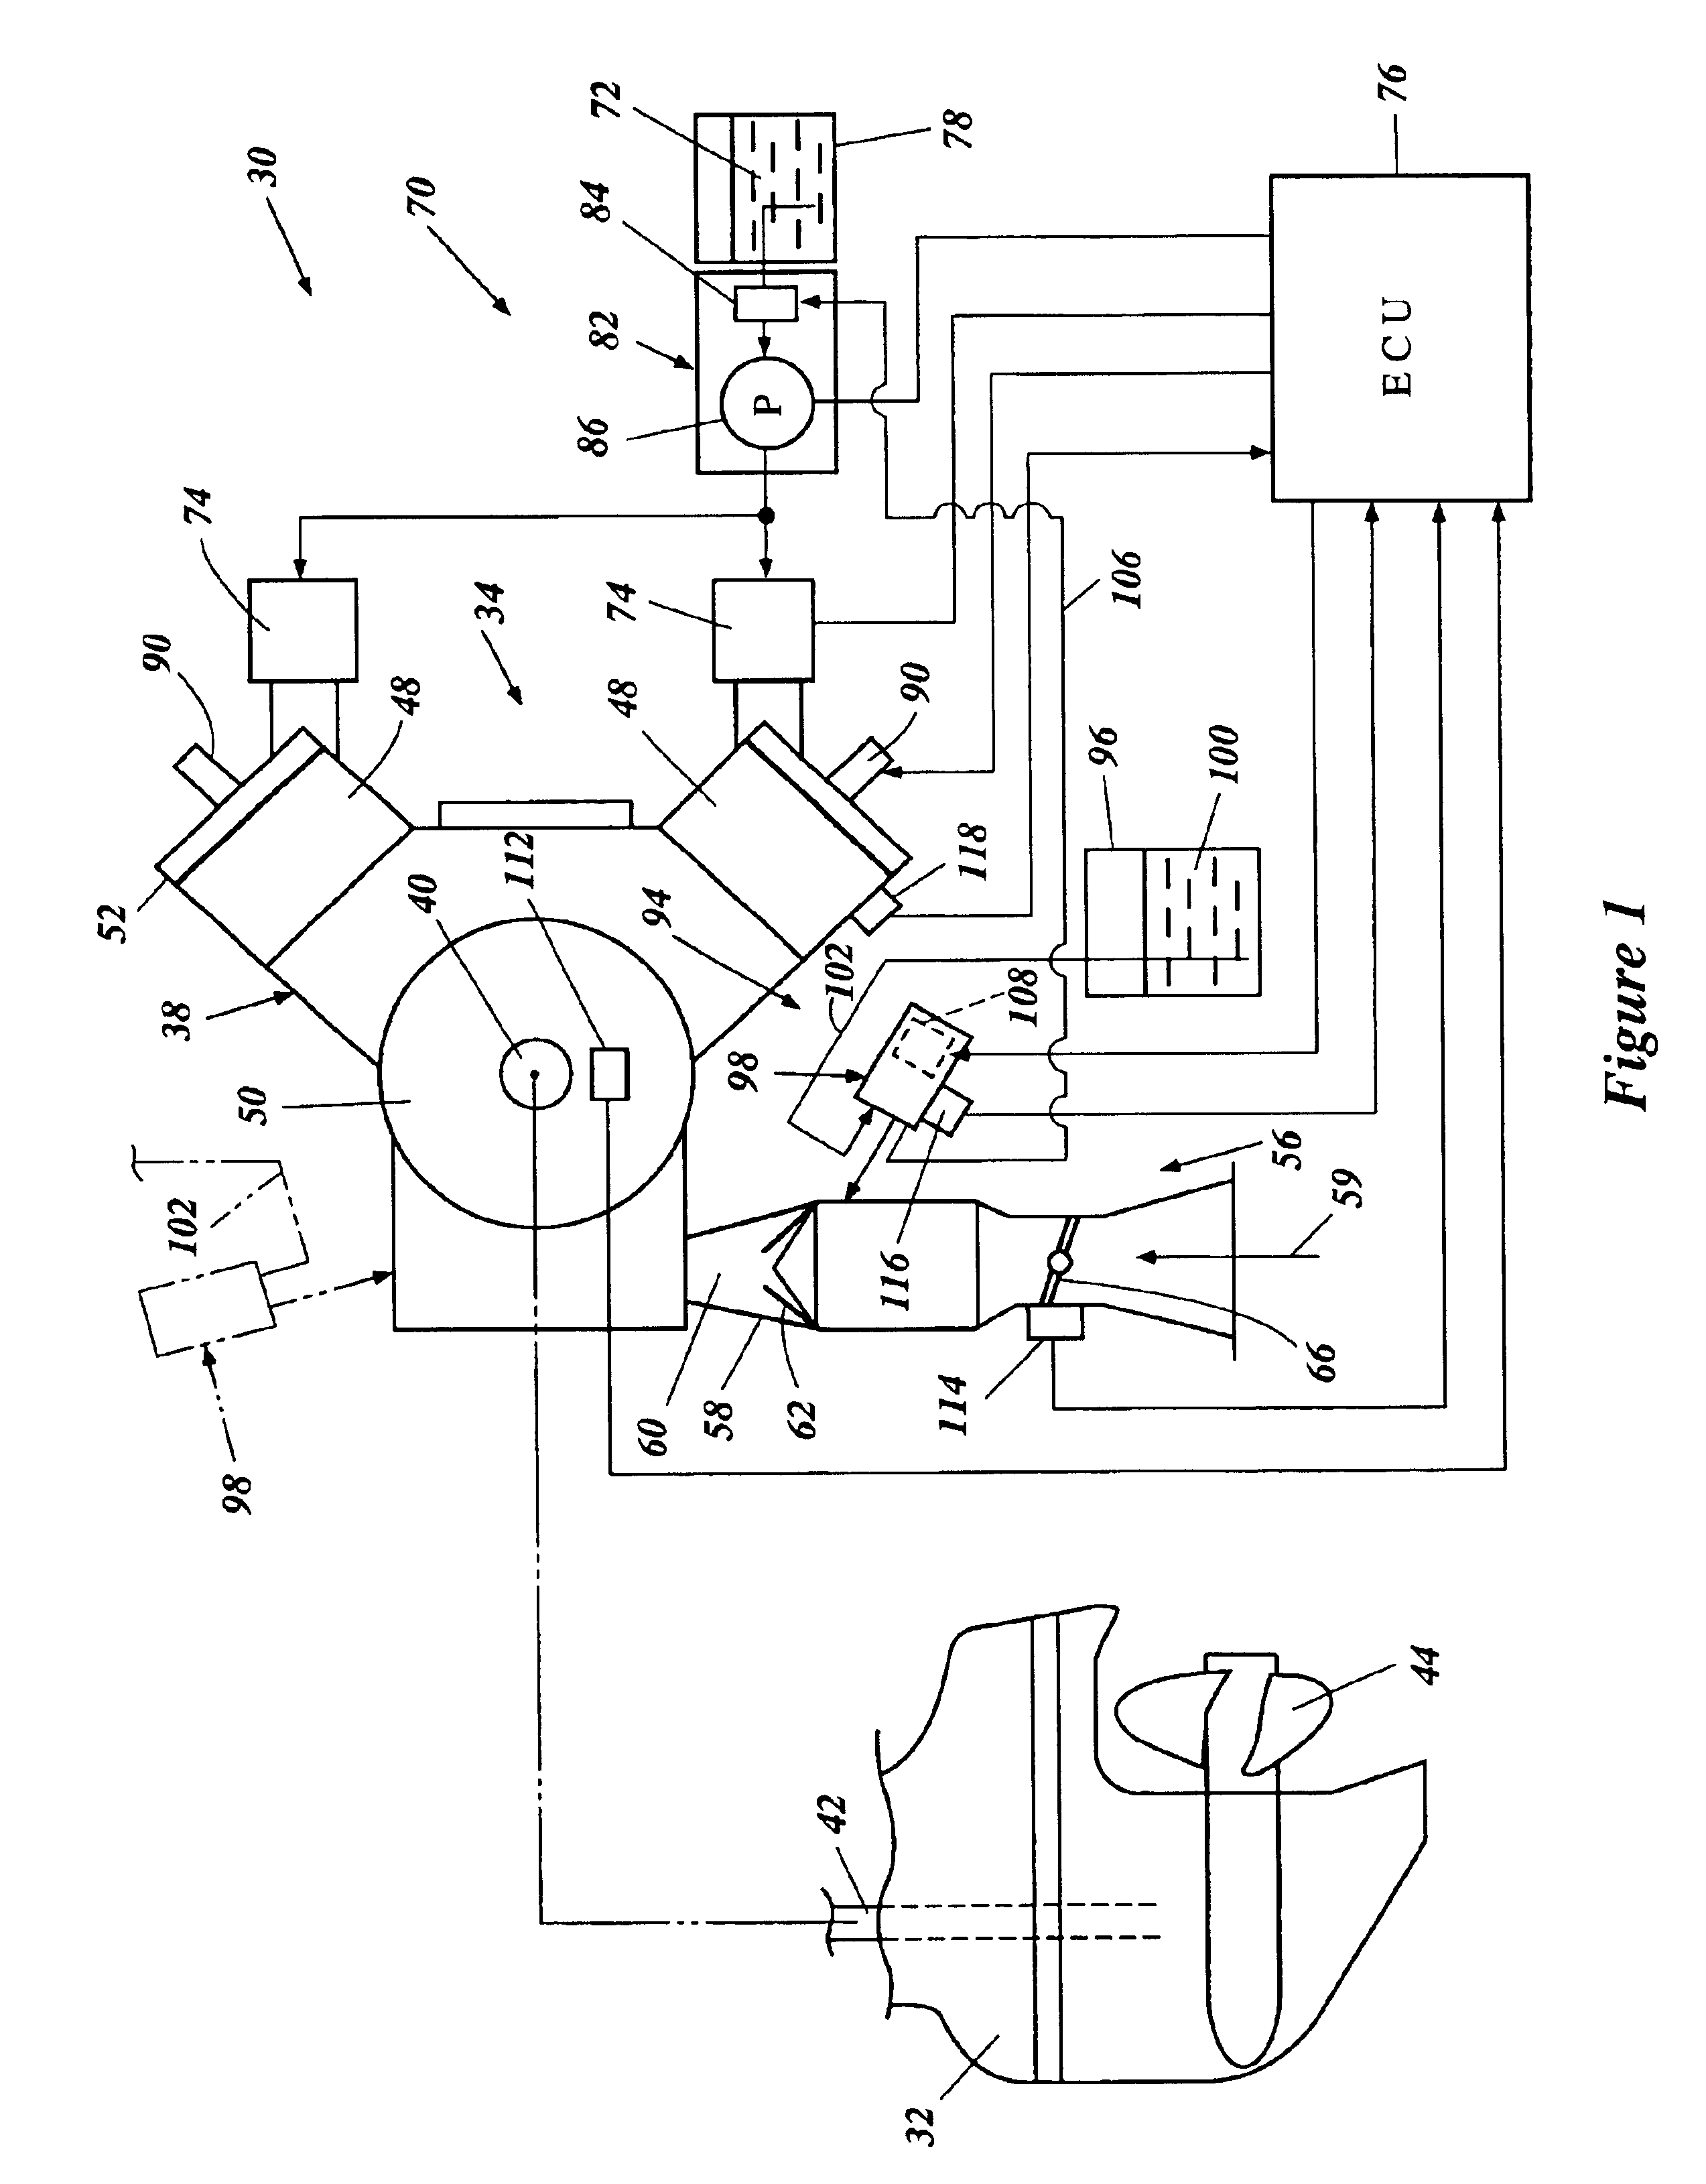 Lubrication system for two-cycle engine